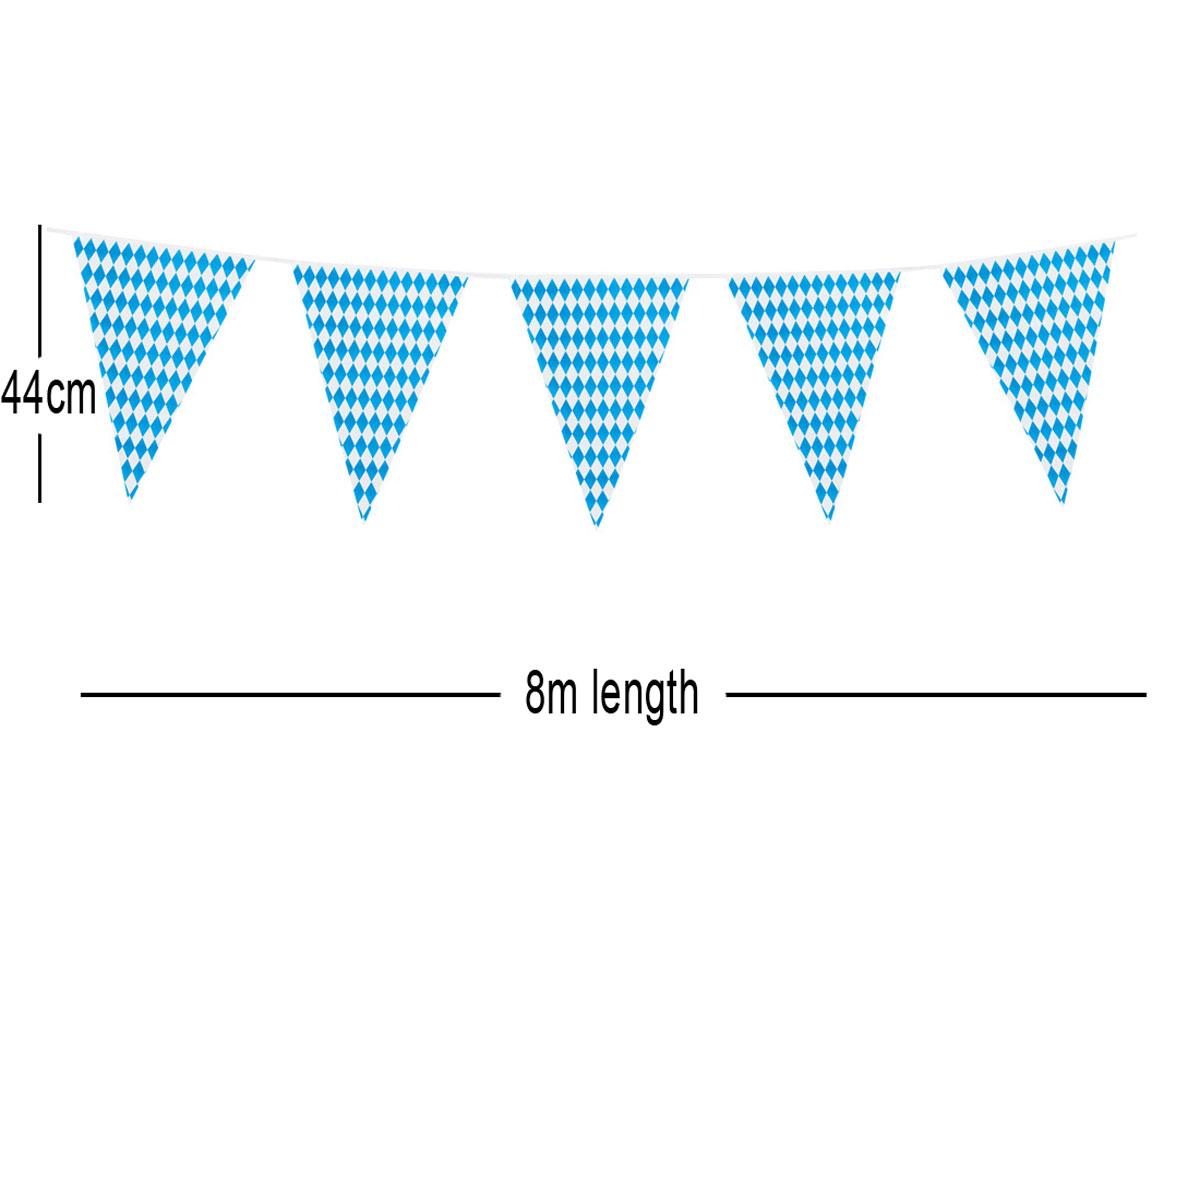 Giant Bavarian Pennant Flag Bunting 8m length with 44cm flags by Boland 54260 available in the UK here at Karnival Costumes online Oktoberfest shop